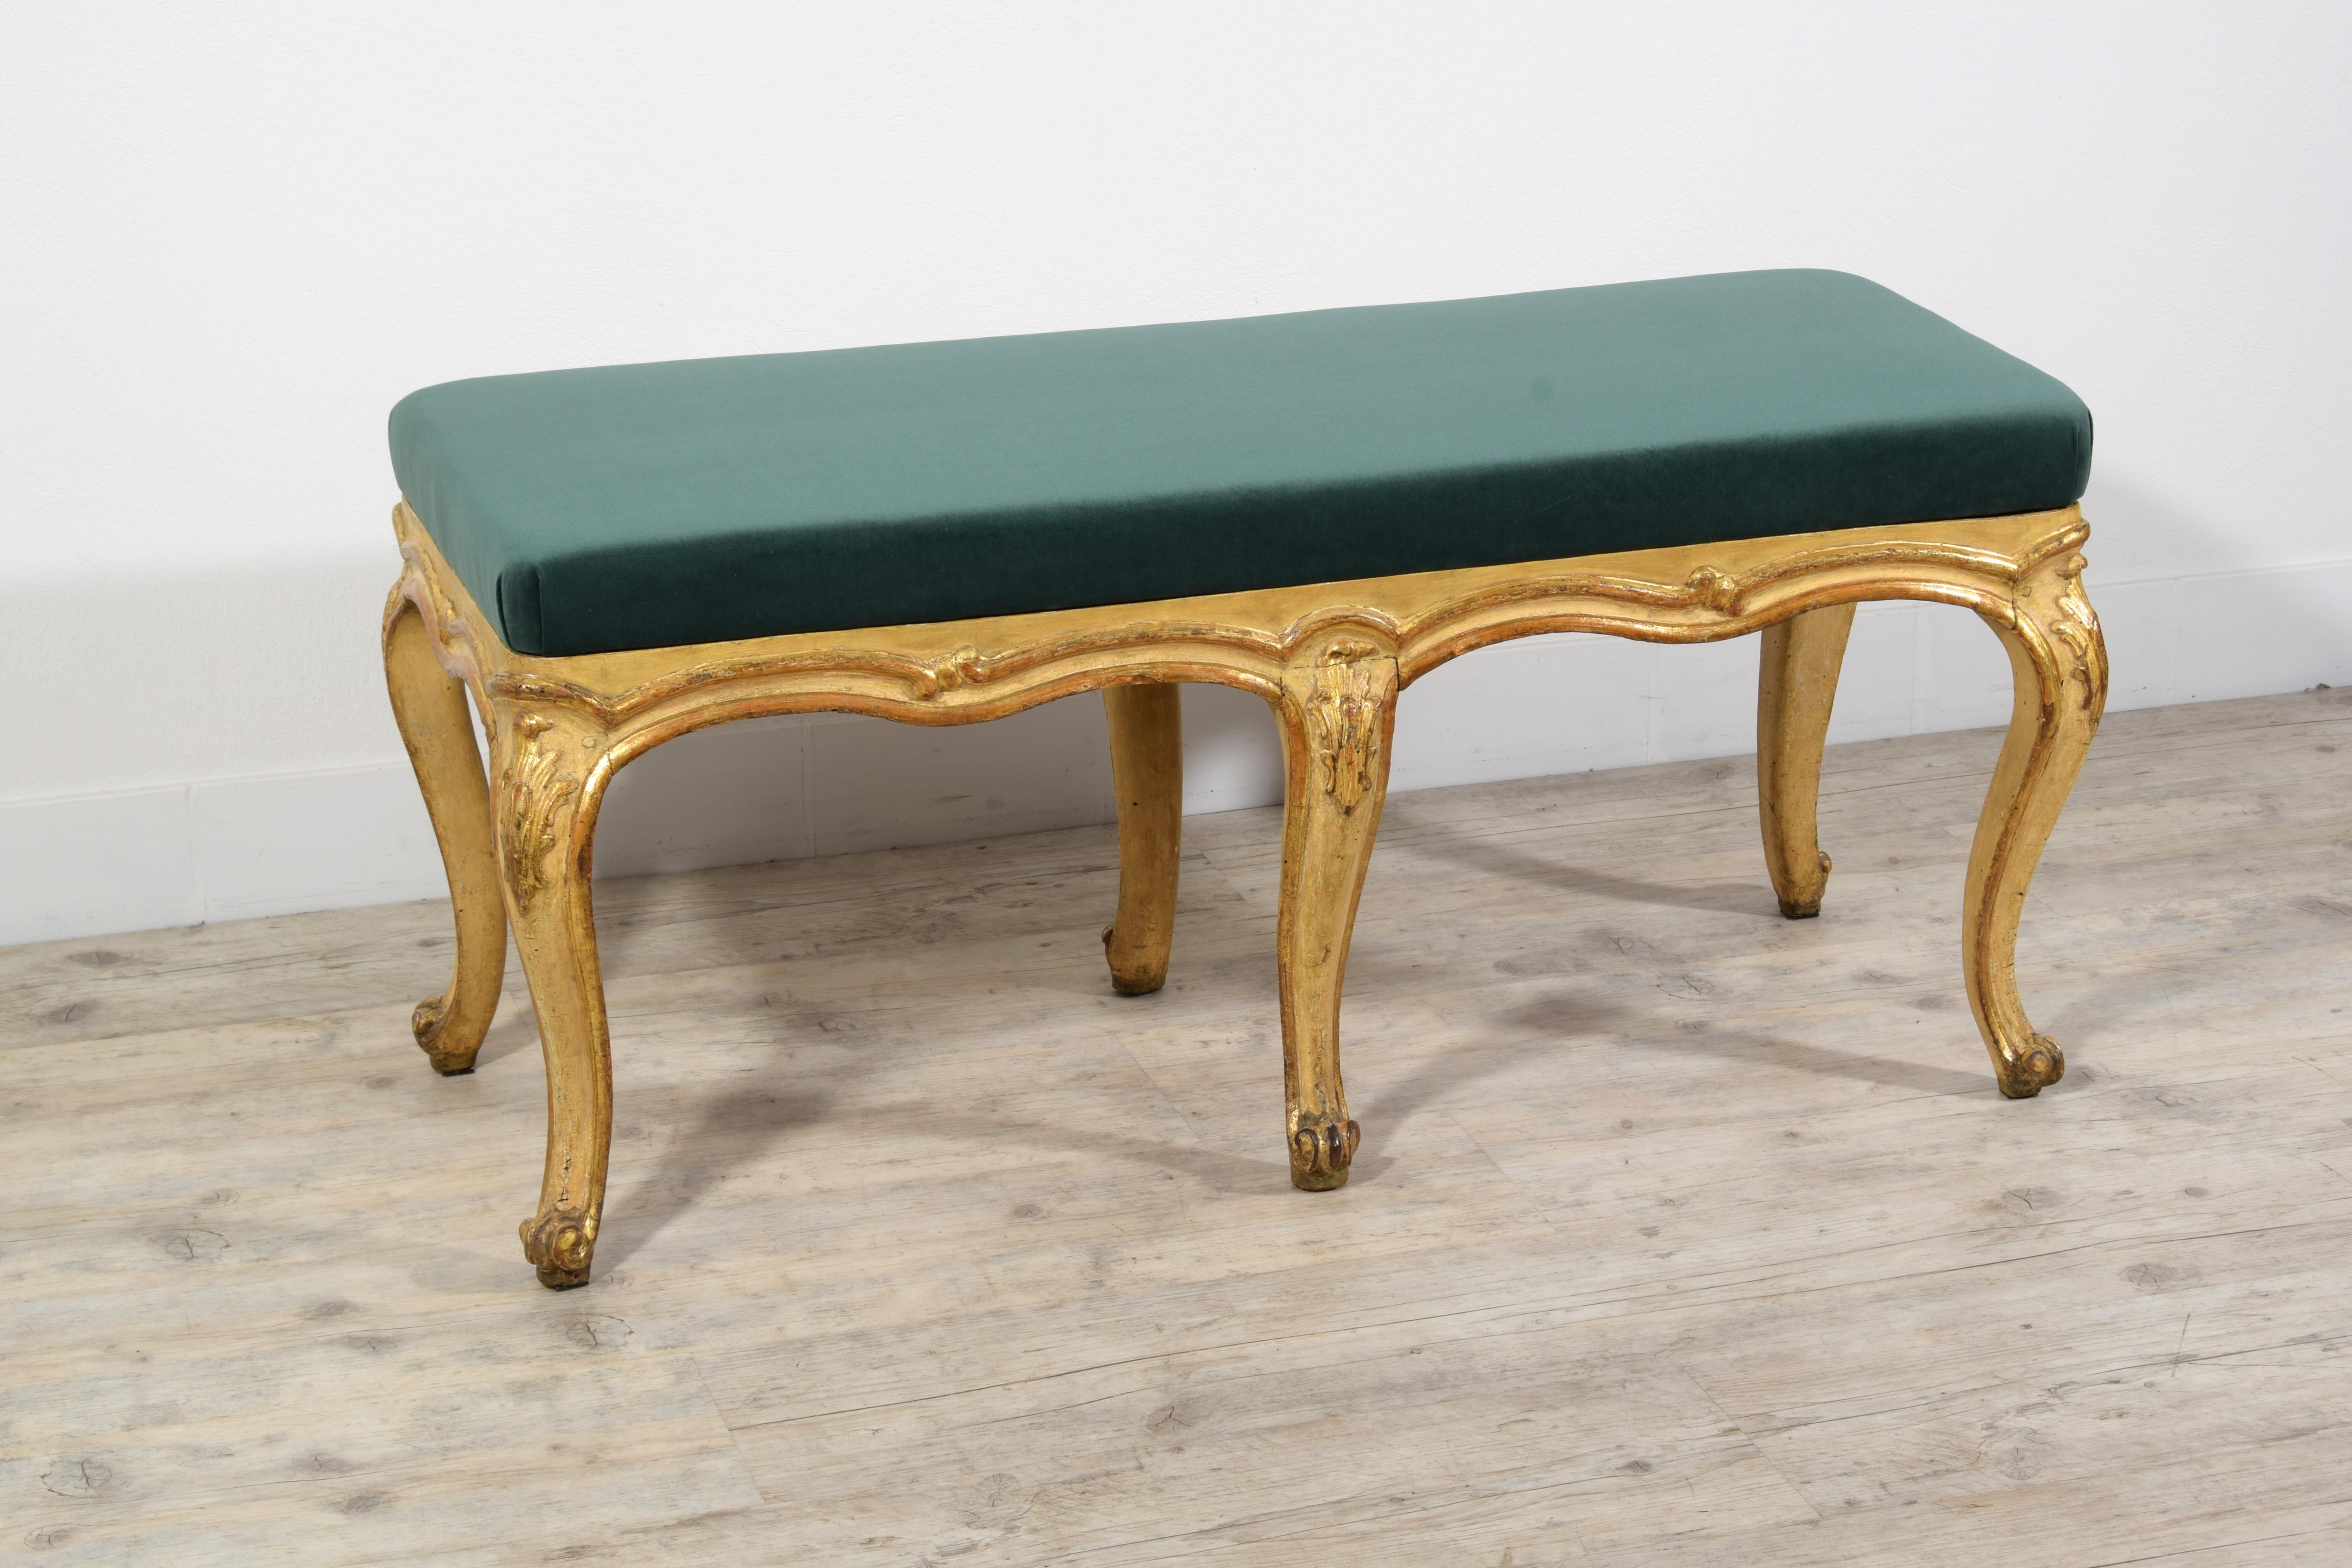 18th century, Italian Rococo Lacquered and Gilt Wood Bench  For Sale 3